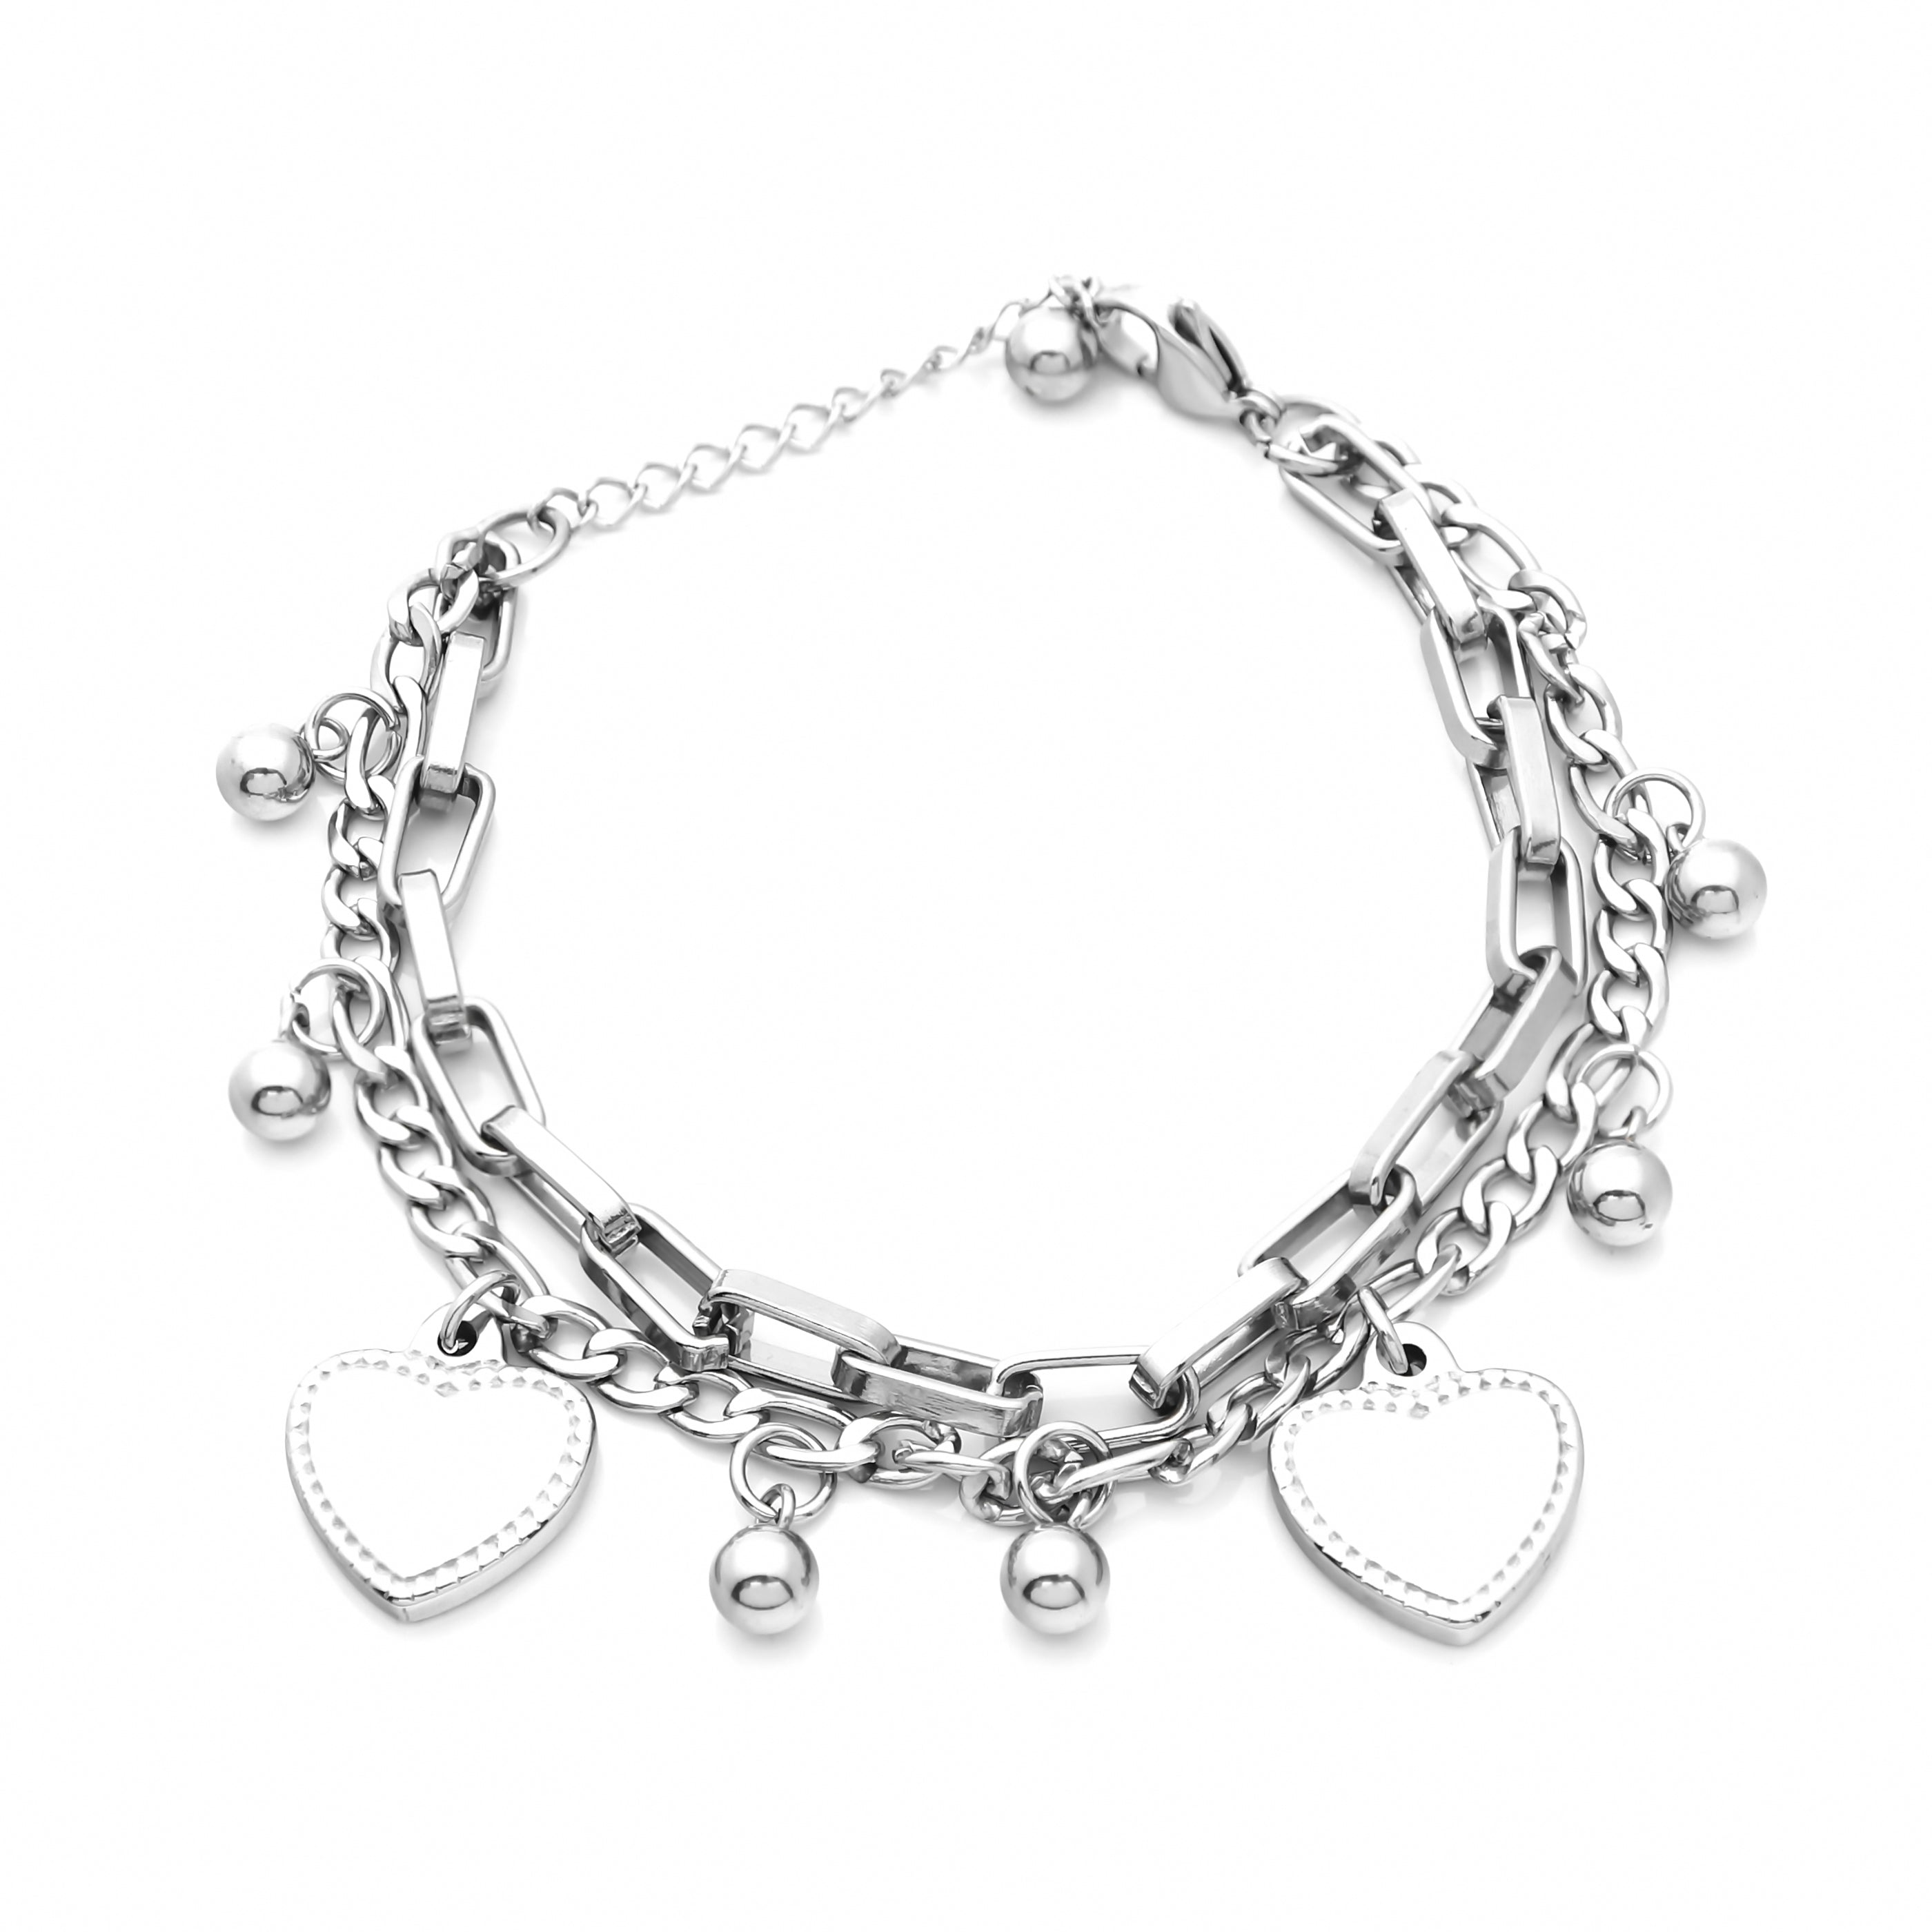 Double Layered Women's Bracelet with Dangle Heart Charms - Silver-Bracelets, Jewellery, Stainless Steel, Stainless Steel Bracelet, Women's Bracelet, Women's Jewellery-sb0074-s-1-Glitters